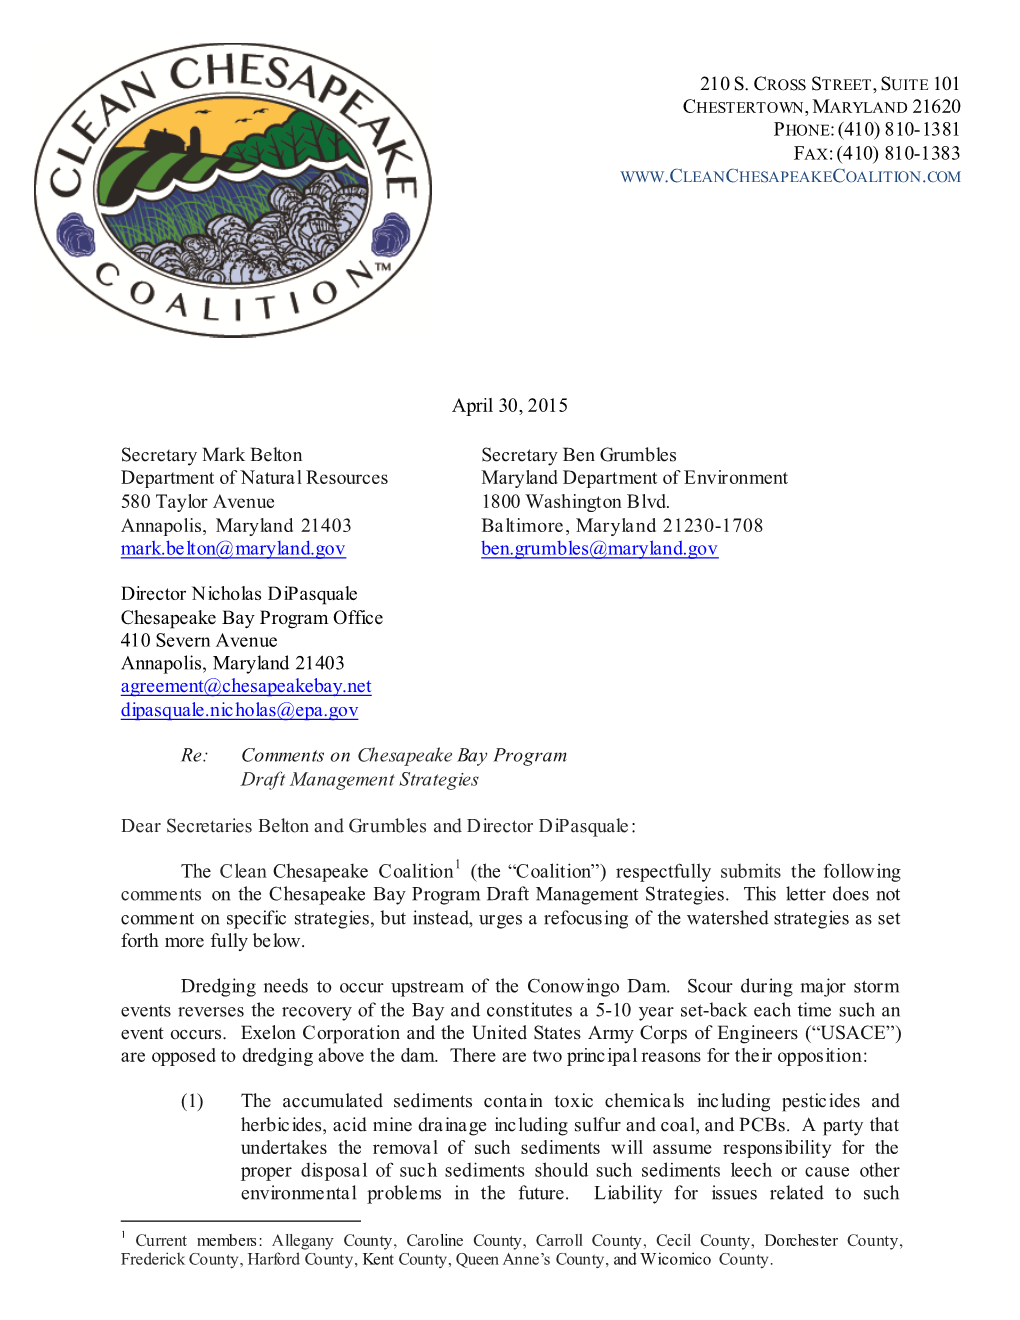 Letter from Clean Chesapeake Coalition